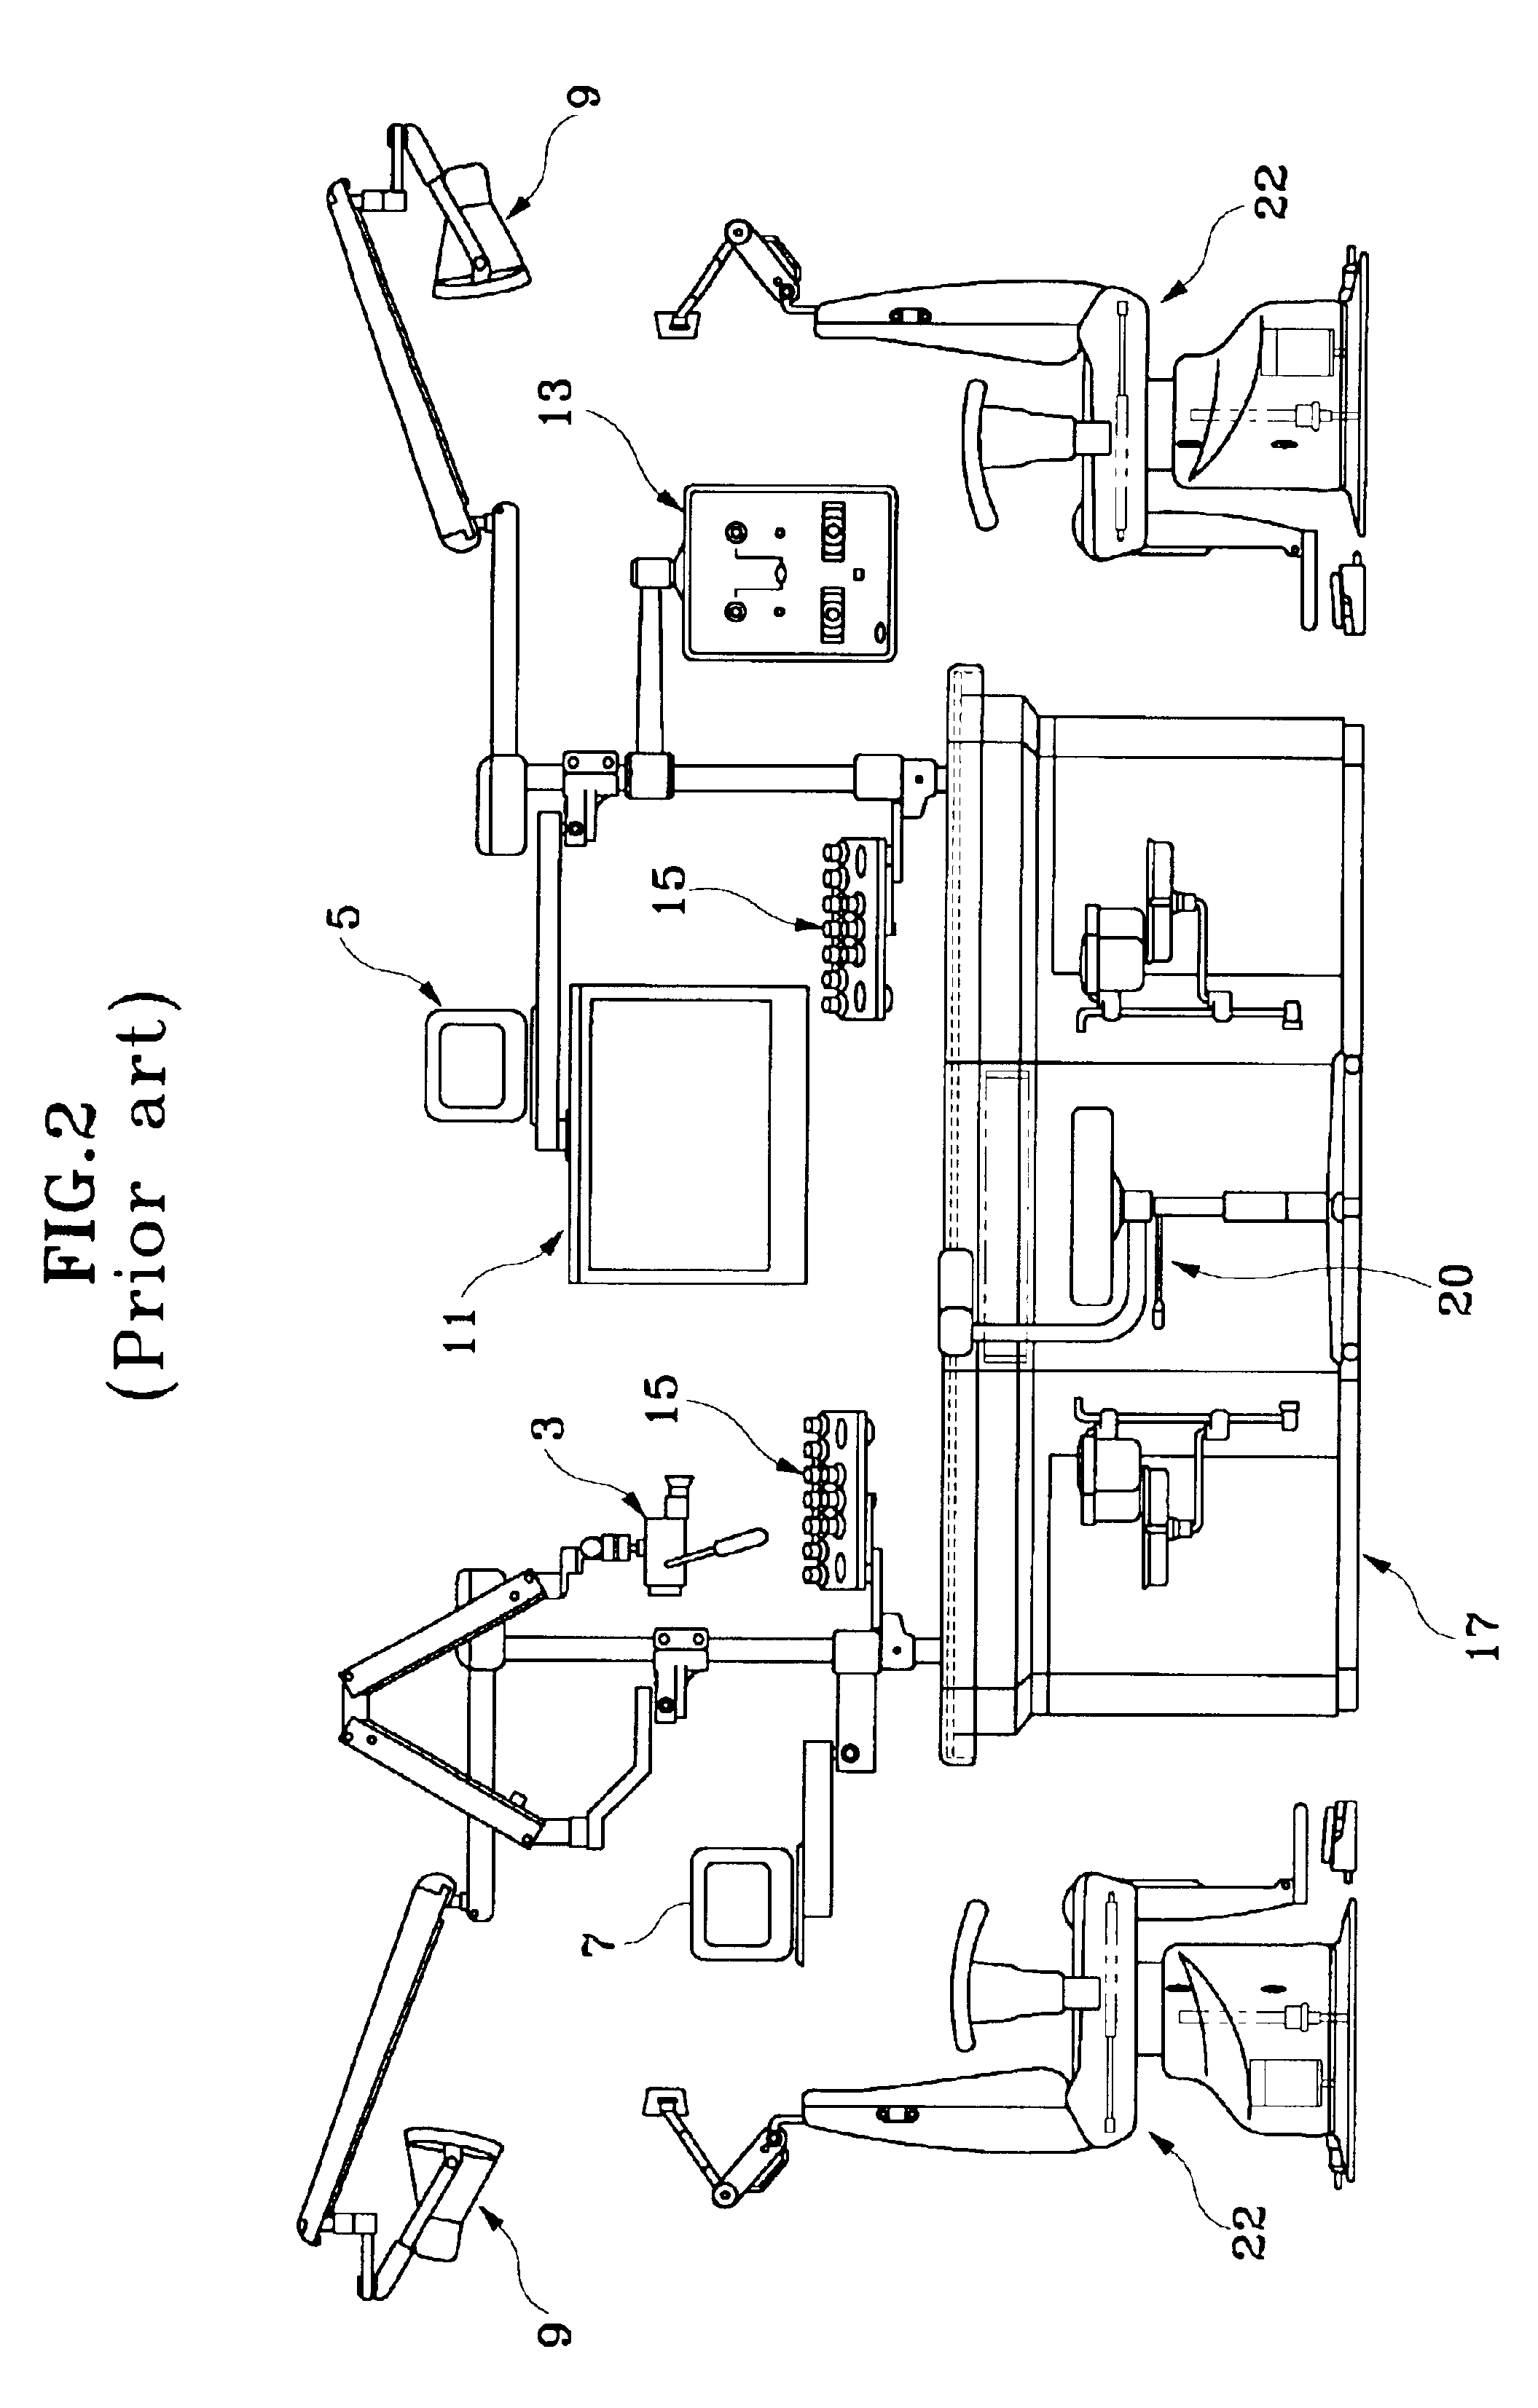 Rotating patient chair with ear diagnosis and treatment unit